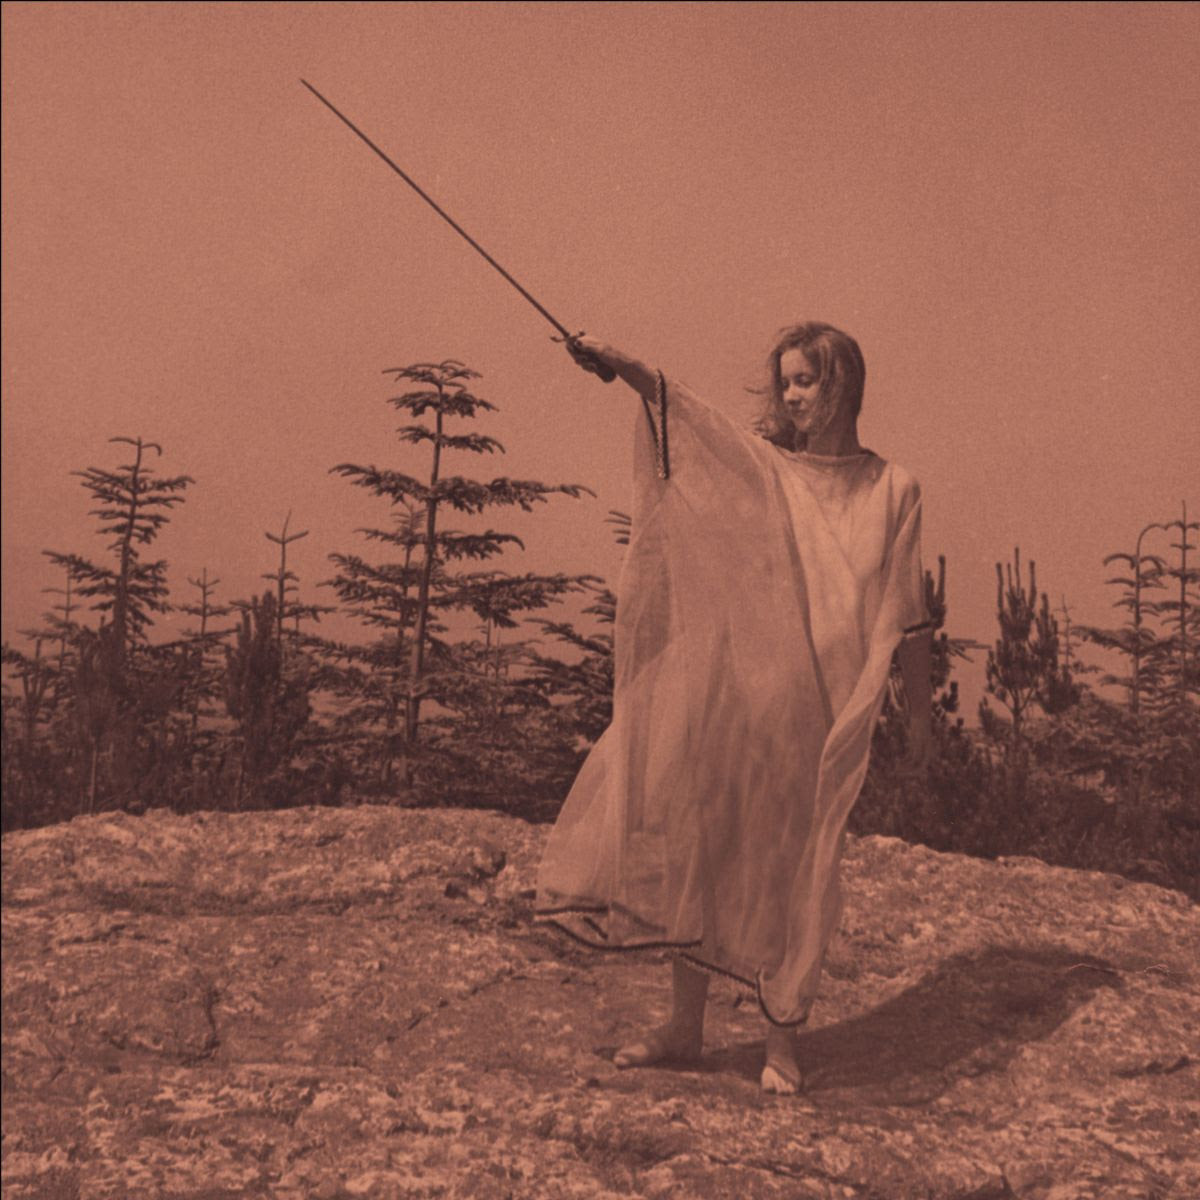 Unknown Mortal Orchestra - II (10th Anniversary Edition) | Buy the LP from Flying Nun